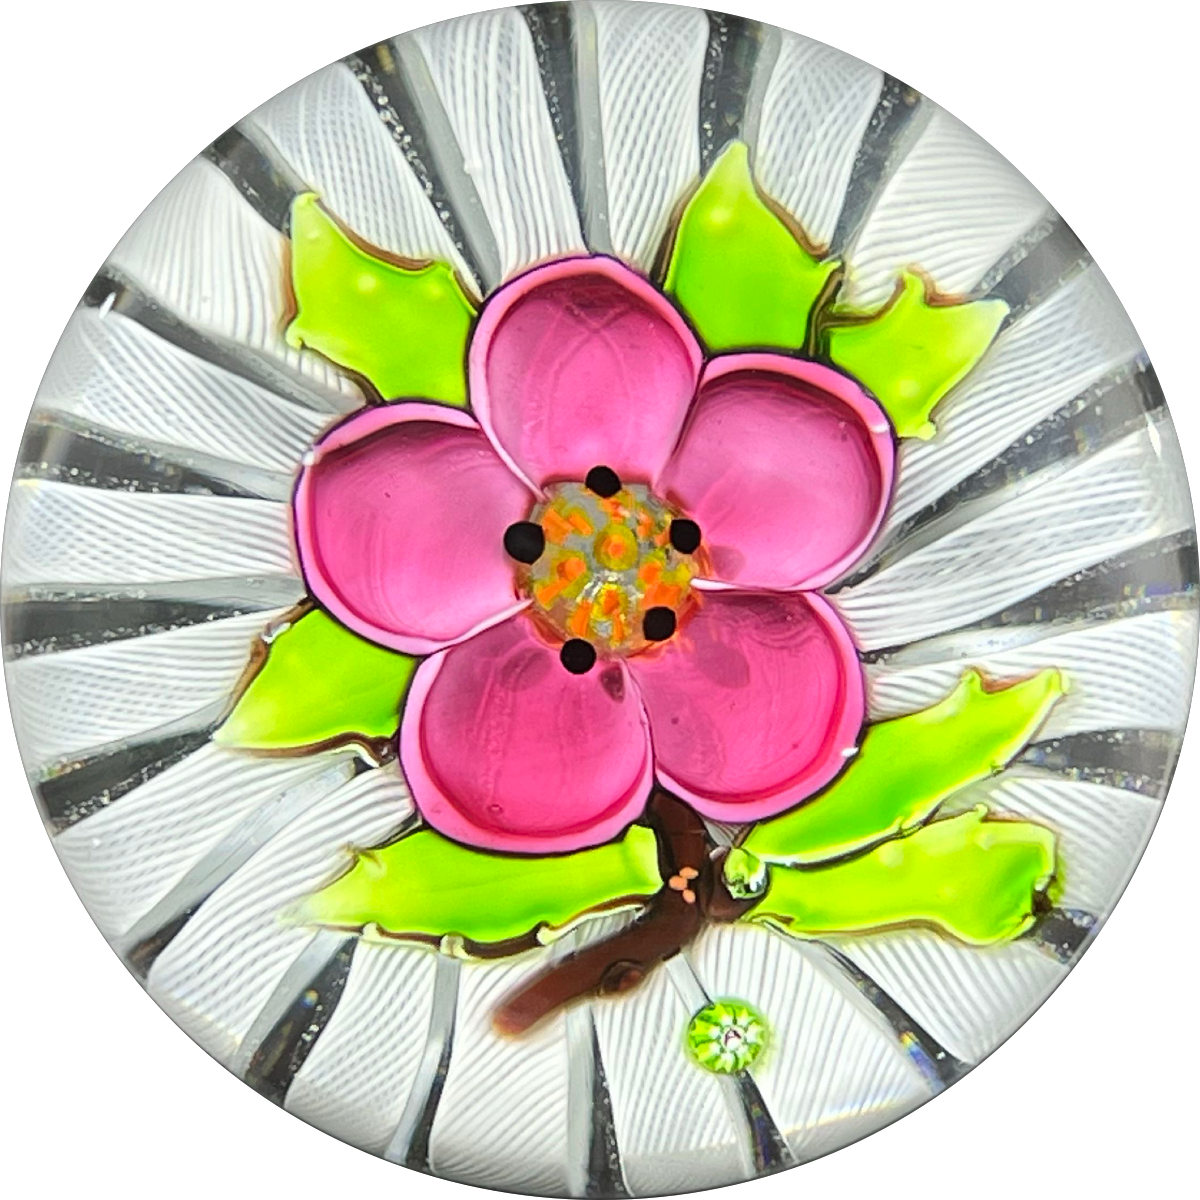 Uncommon Alan Scott for J Glass(Deacons) 1981 Flamework Pink Buttercup Flower over Filigree Crown Cushion